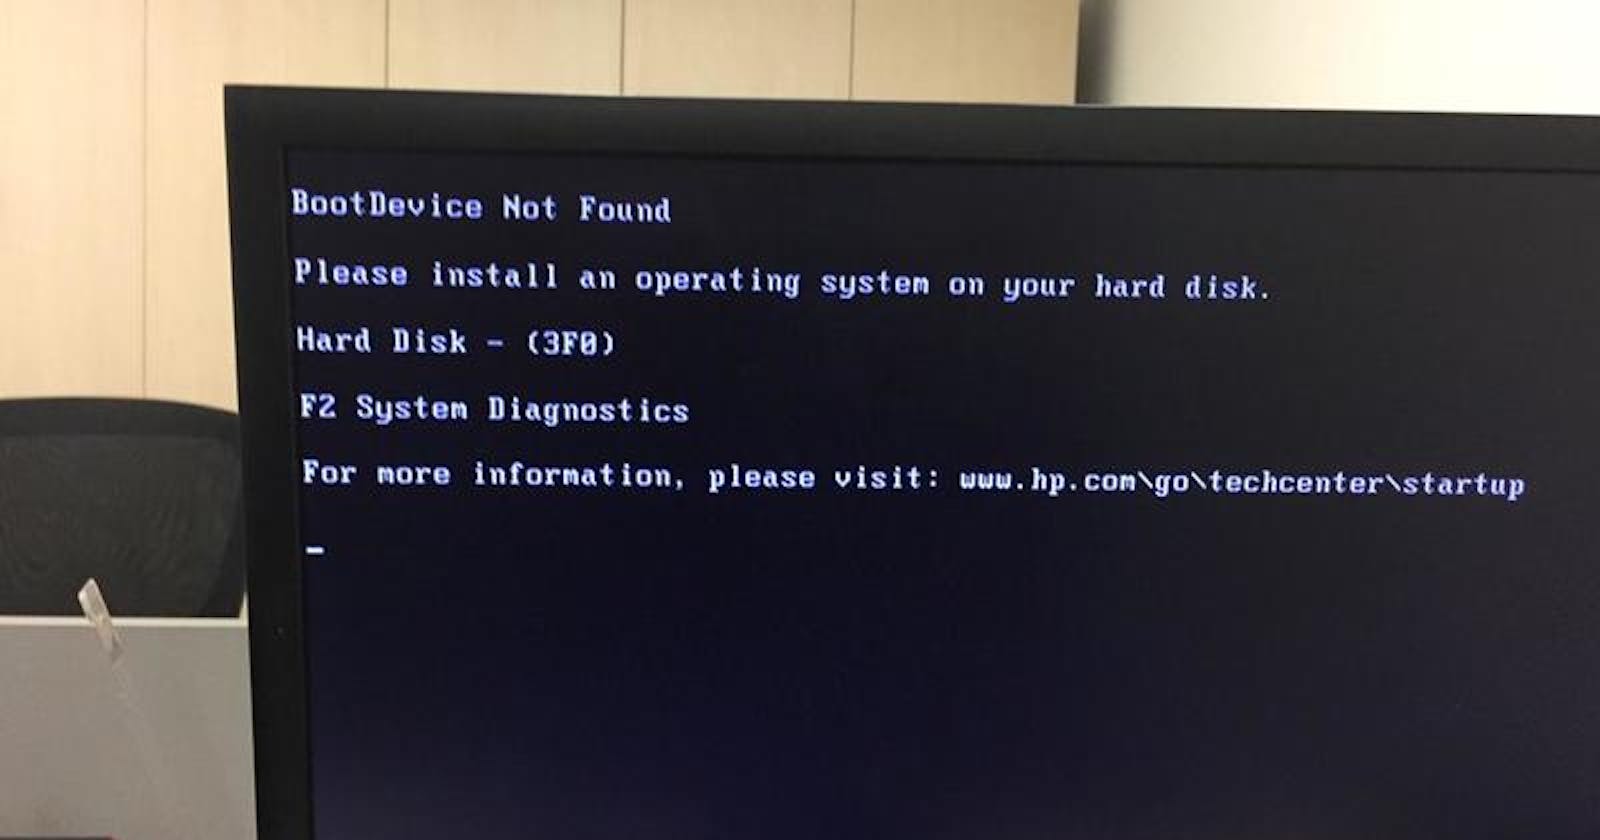 HP Boot device not found while installing Ubuntu  (3F0)